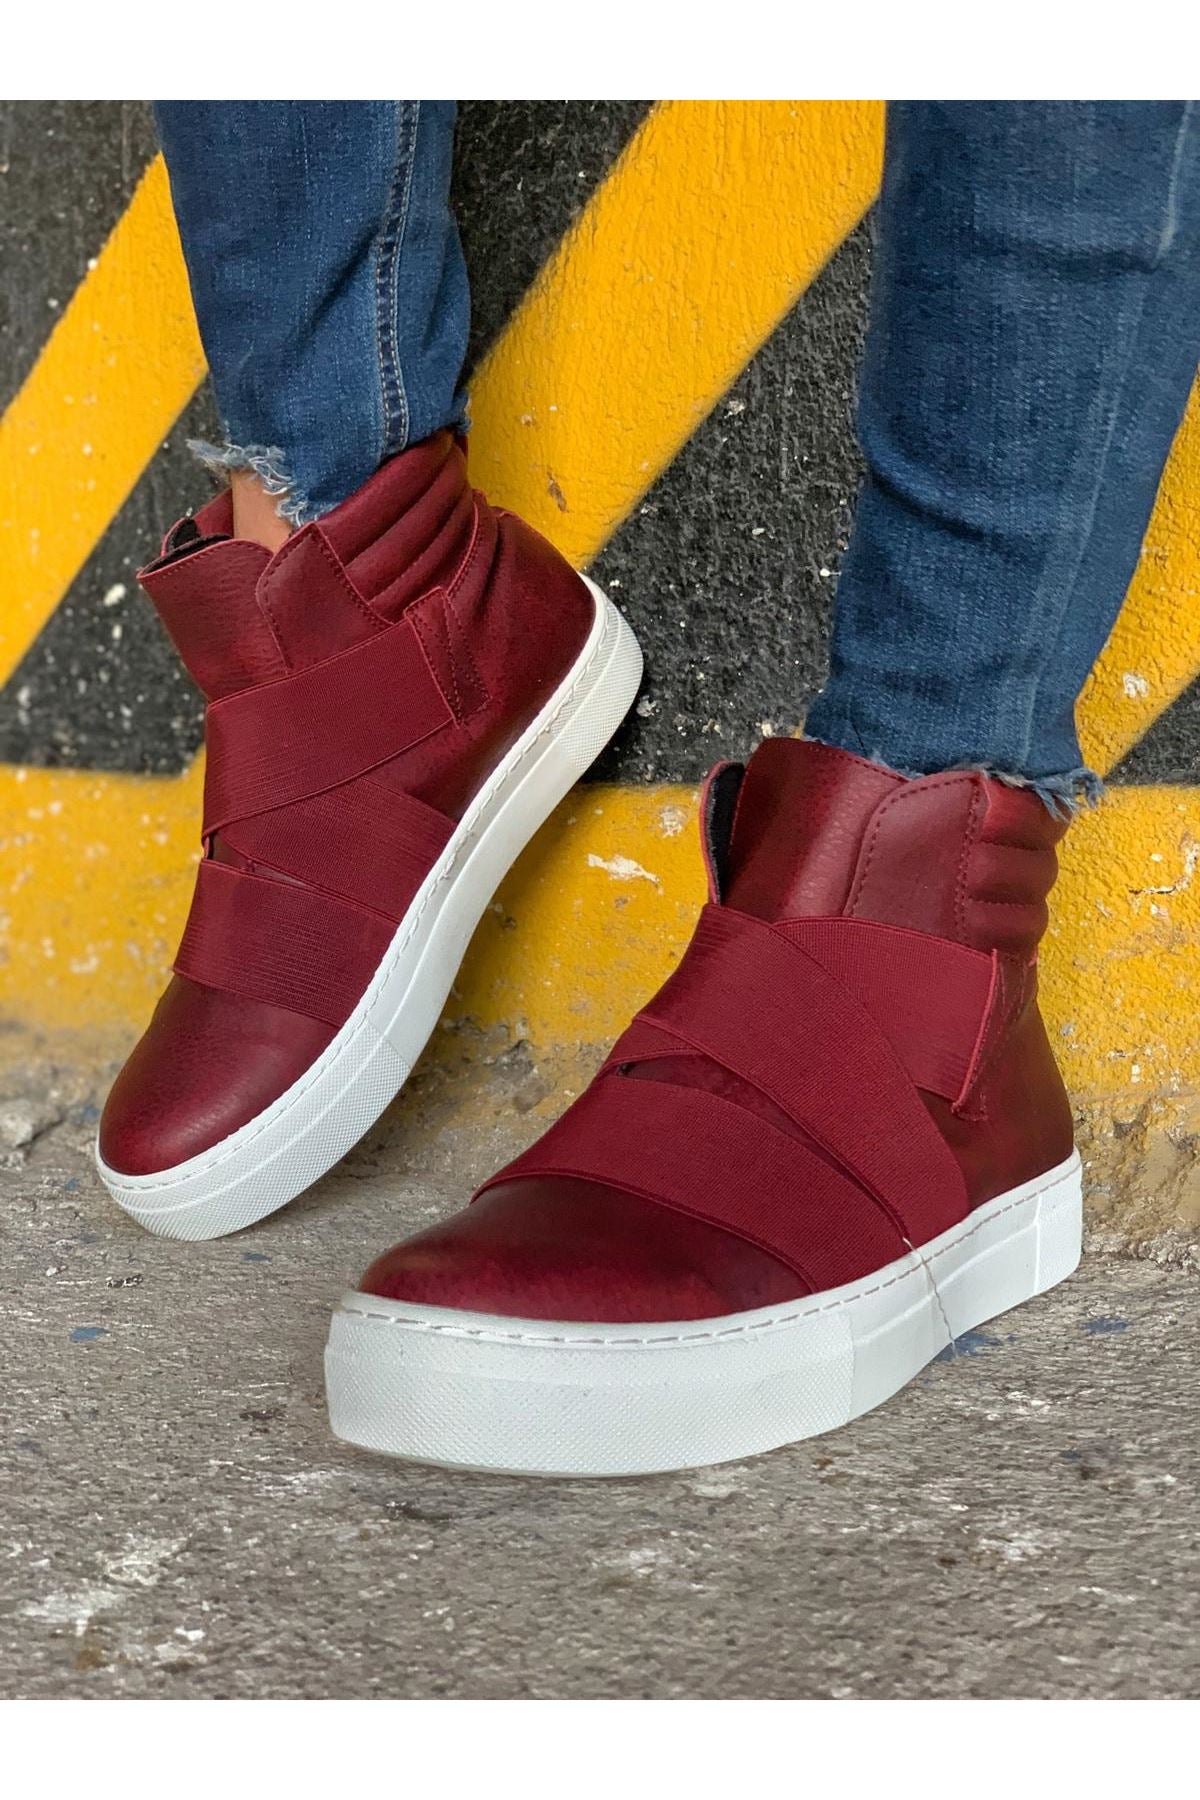 CH023 Men's Banded Red-White Sole Casual Sneaker Boots - STREETMODE ™